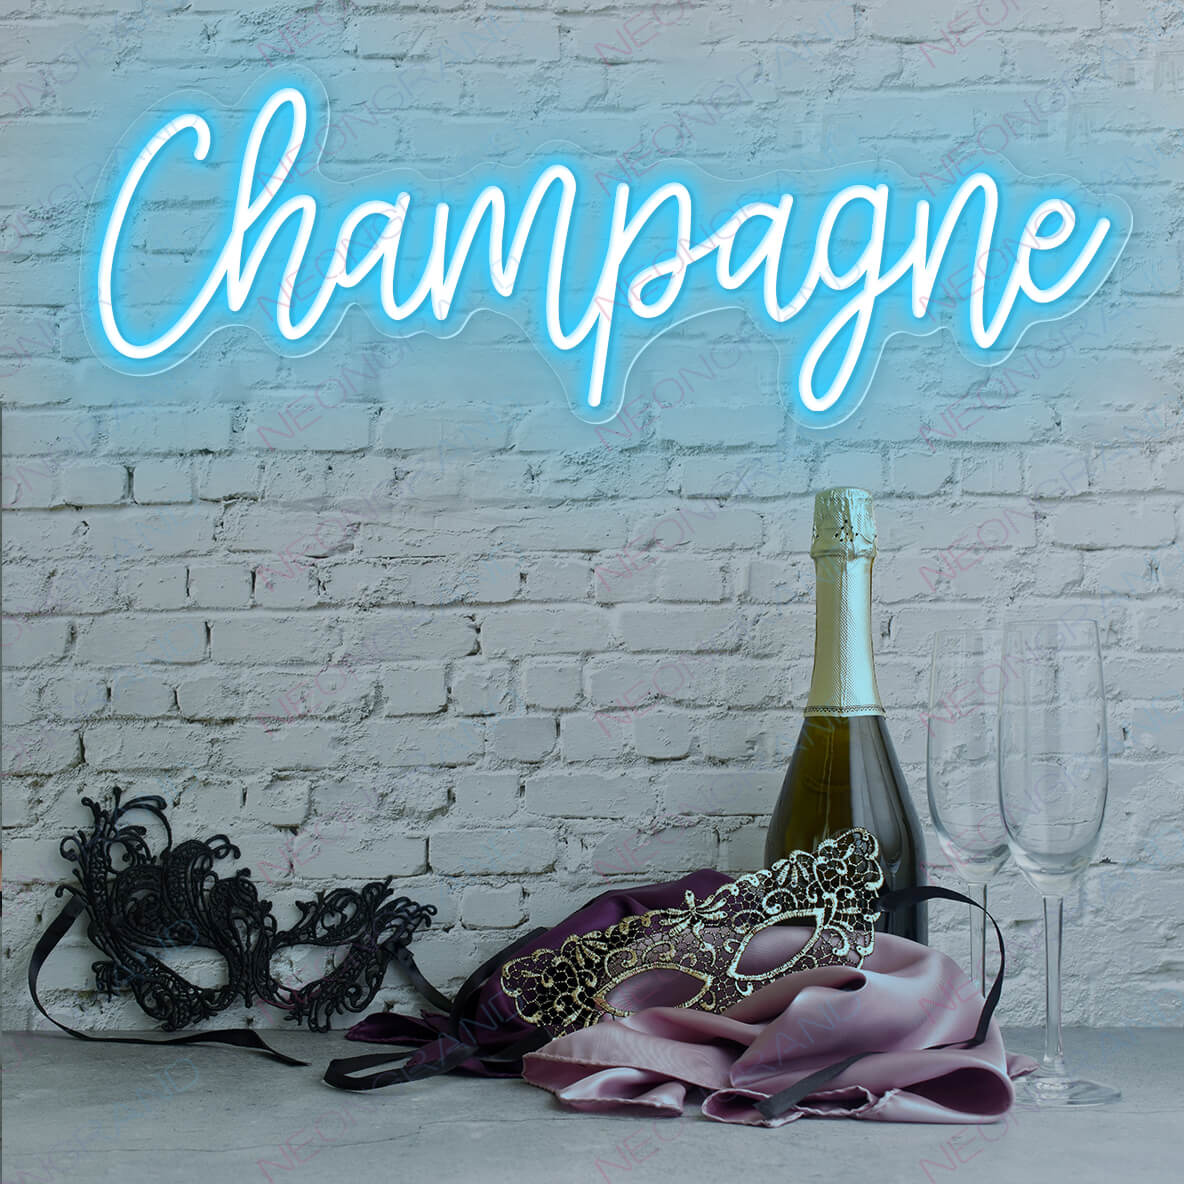 Champagne Neon Sign light blue